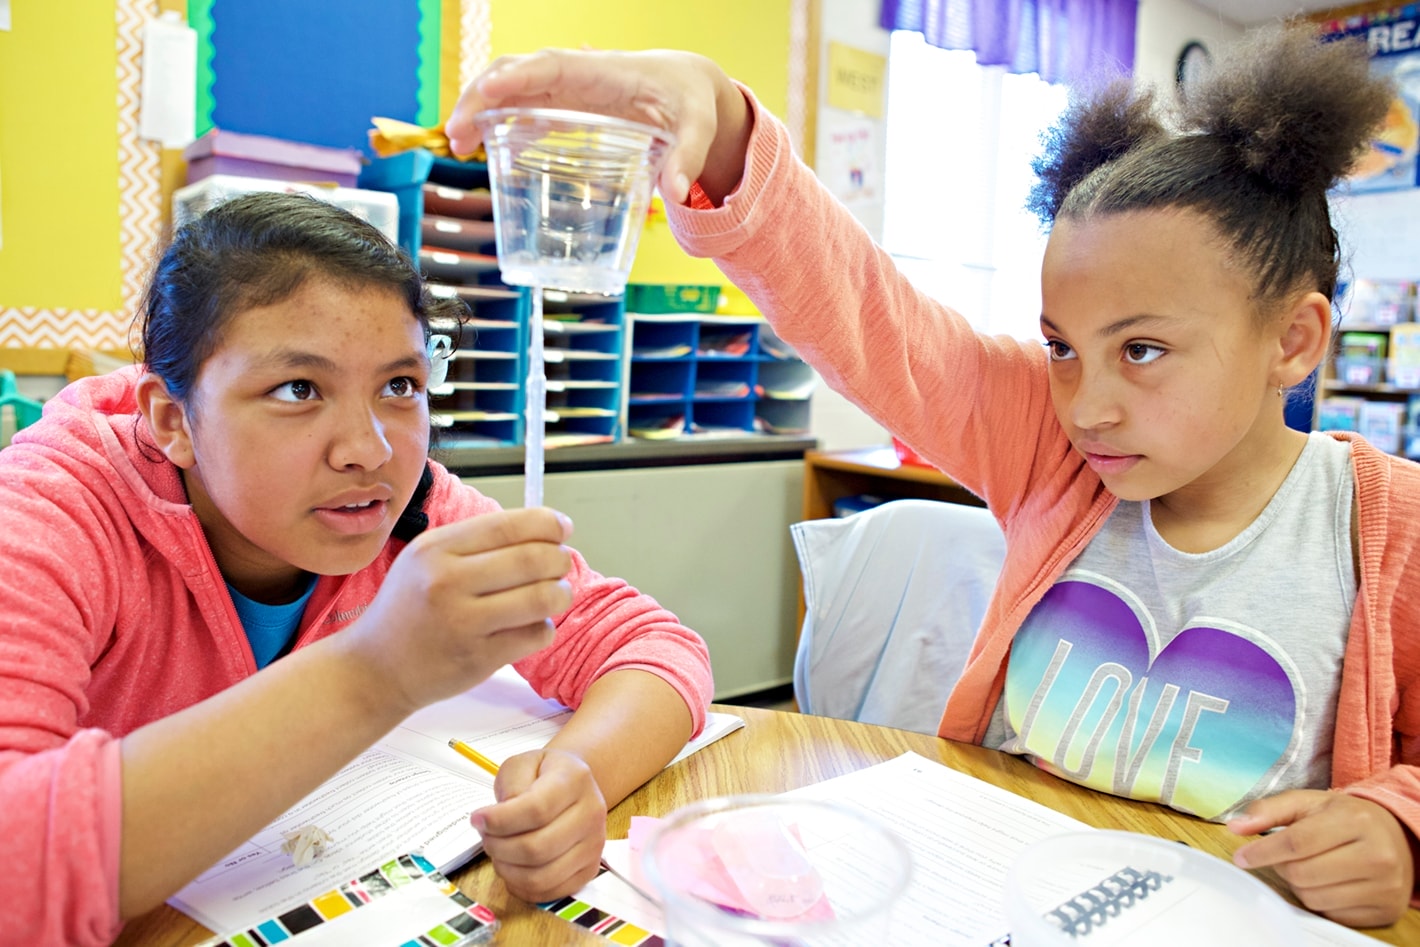 Two students conducting a science experiment in a classroom, one pouring liquid into a container while the other observes.